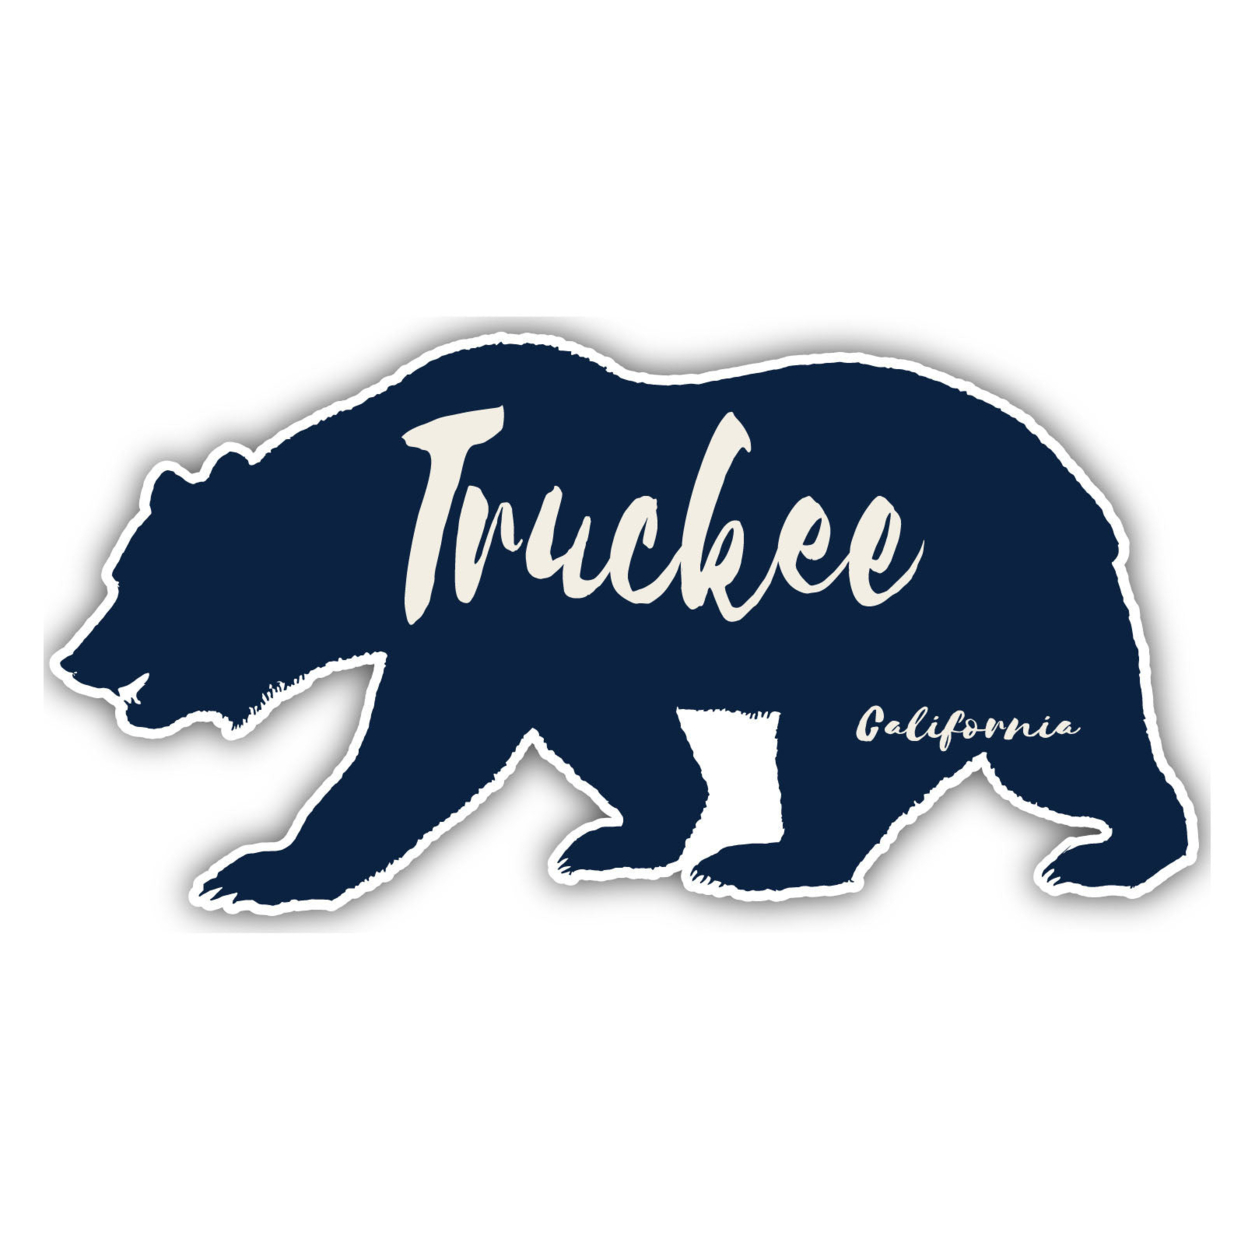 Truckee California Souvenir Decorative Stickers (Choose Theme And Size) - Single Unit, 2-Inch, Adventures Awaits